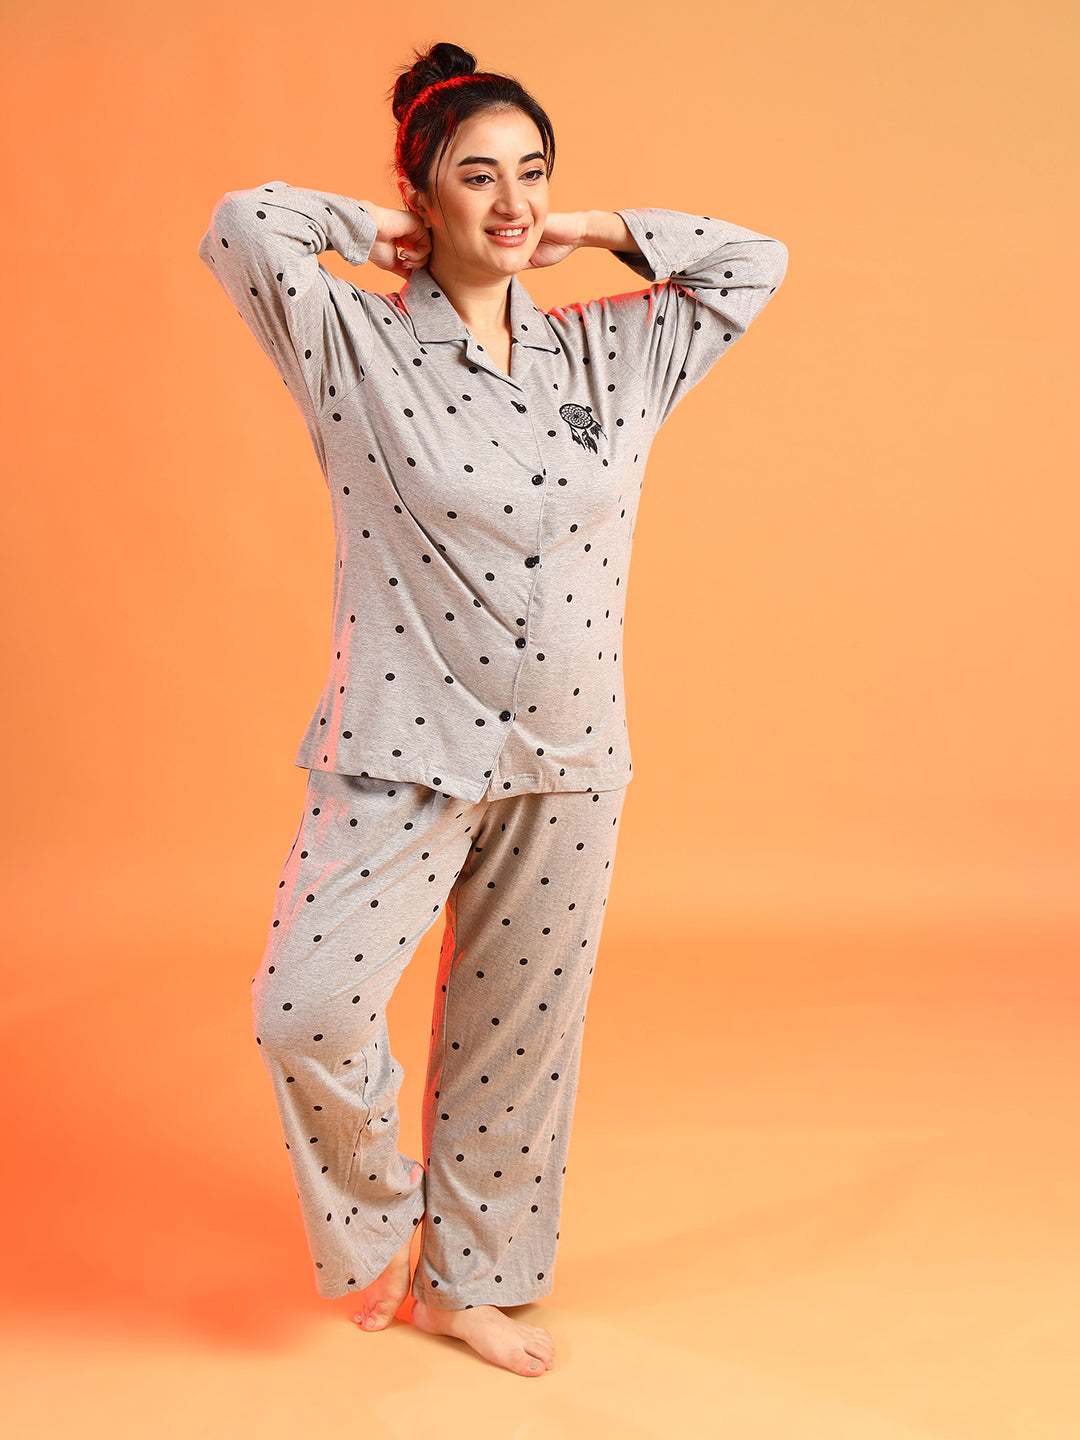 Cupid Plus Size Cotton Night Suit Sets For Women-3xl/4xl/5xl at Rs 995, Night Suits